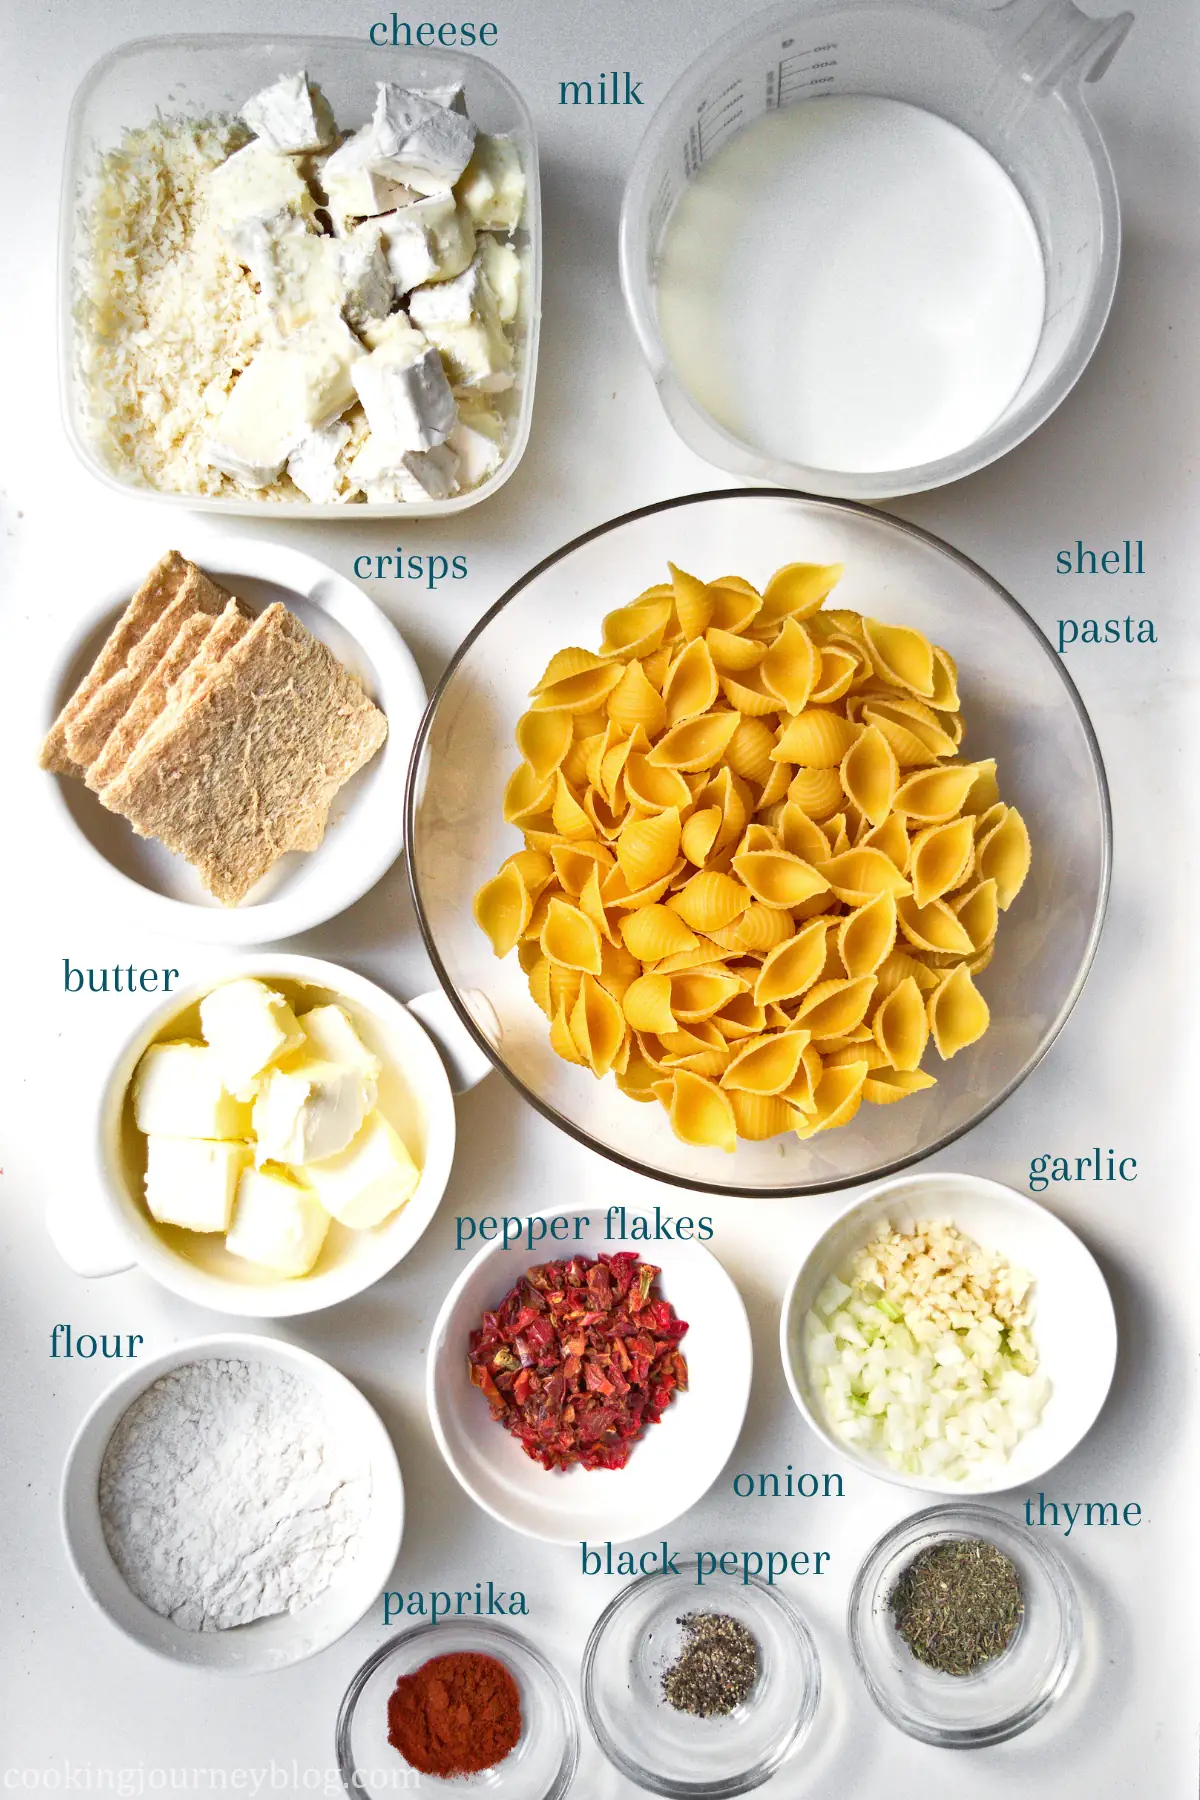 Ingredients for Brie Mac and Cheese, served in separate bowls